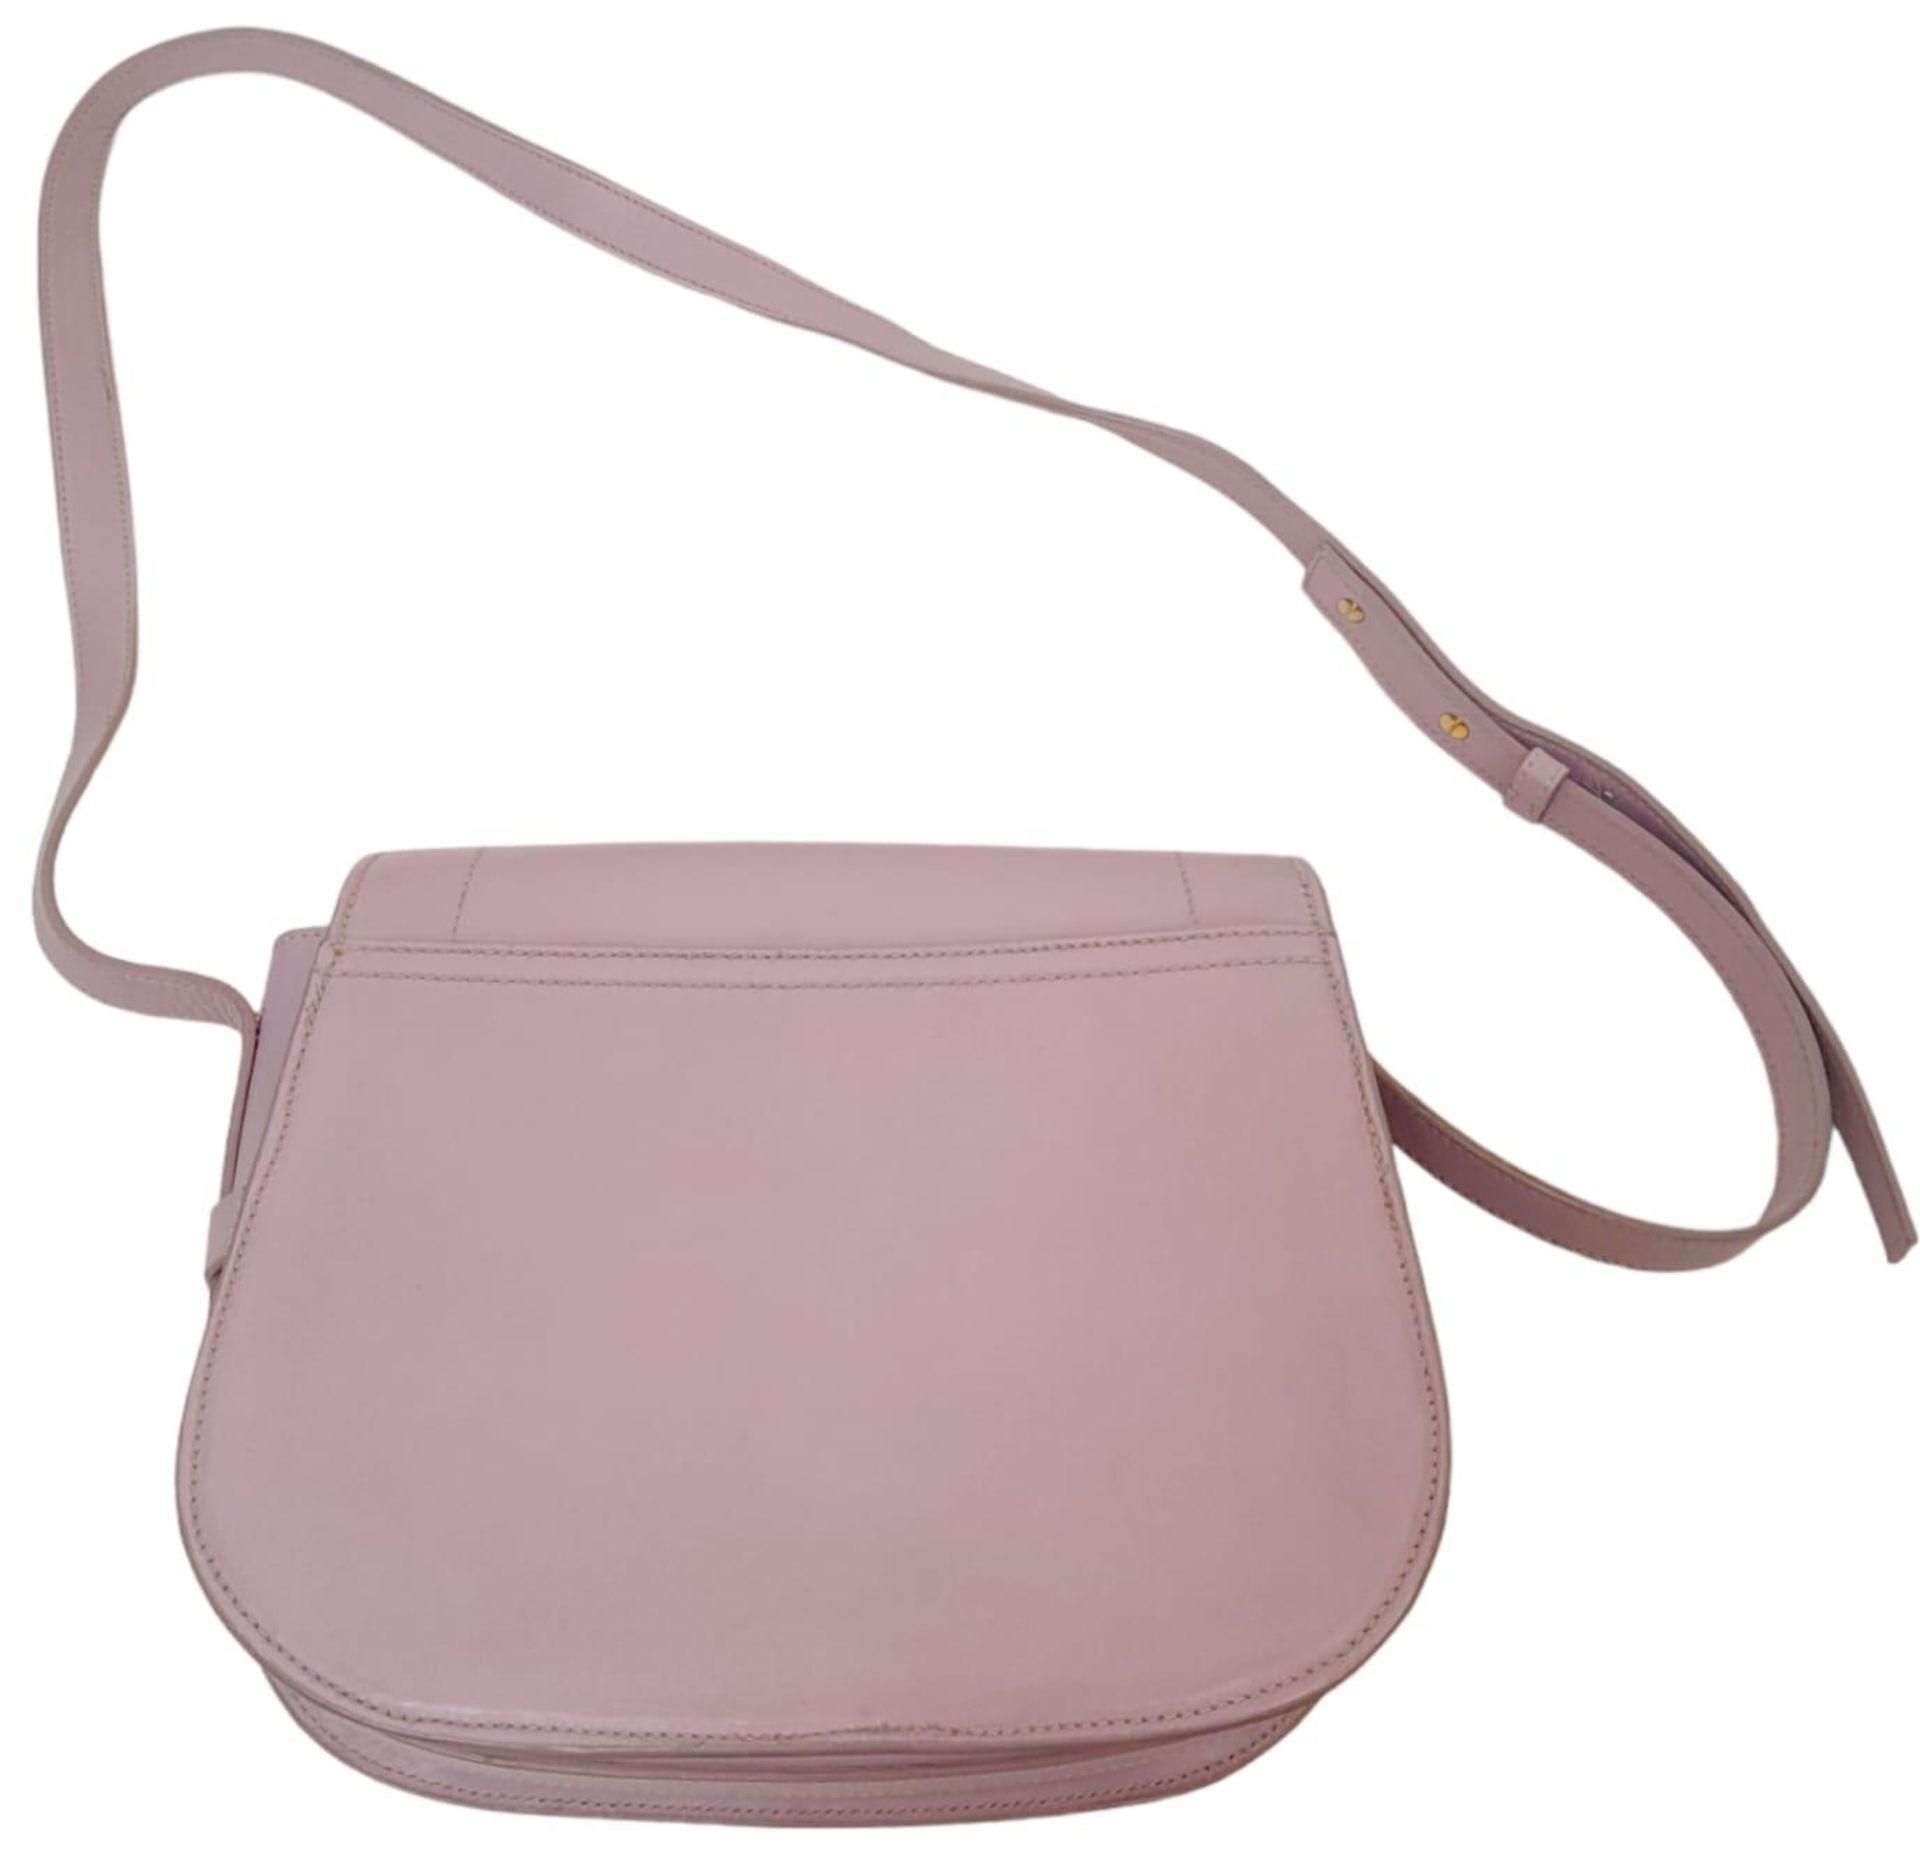 A Paul & Joe Lilac Saddle Bag. Leather exterior with adjustable strap, open compartment on back, and - Bild 5 aus 6